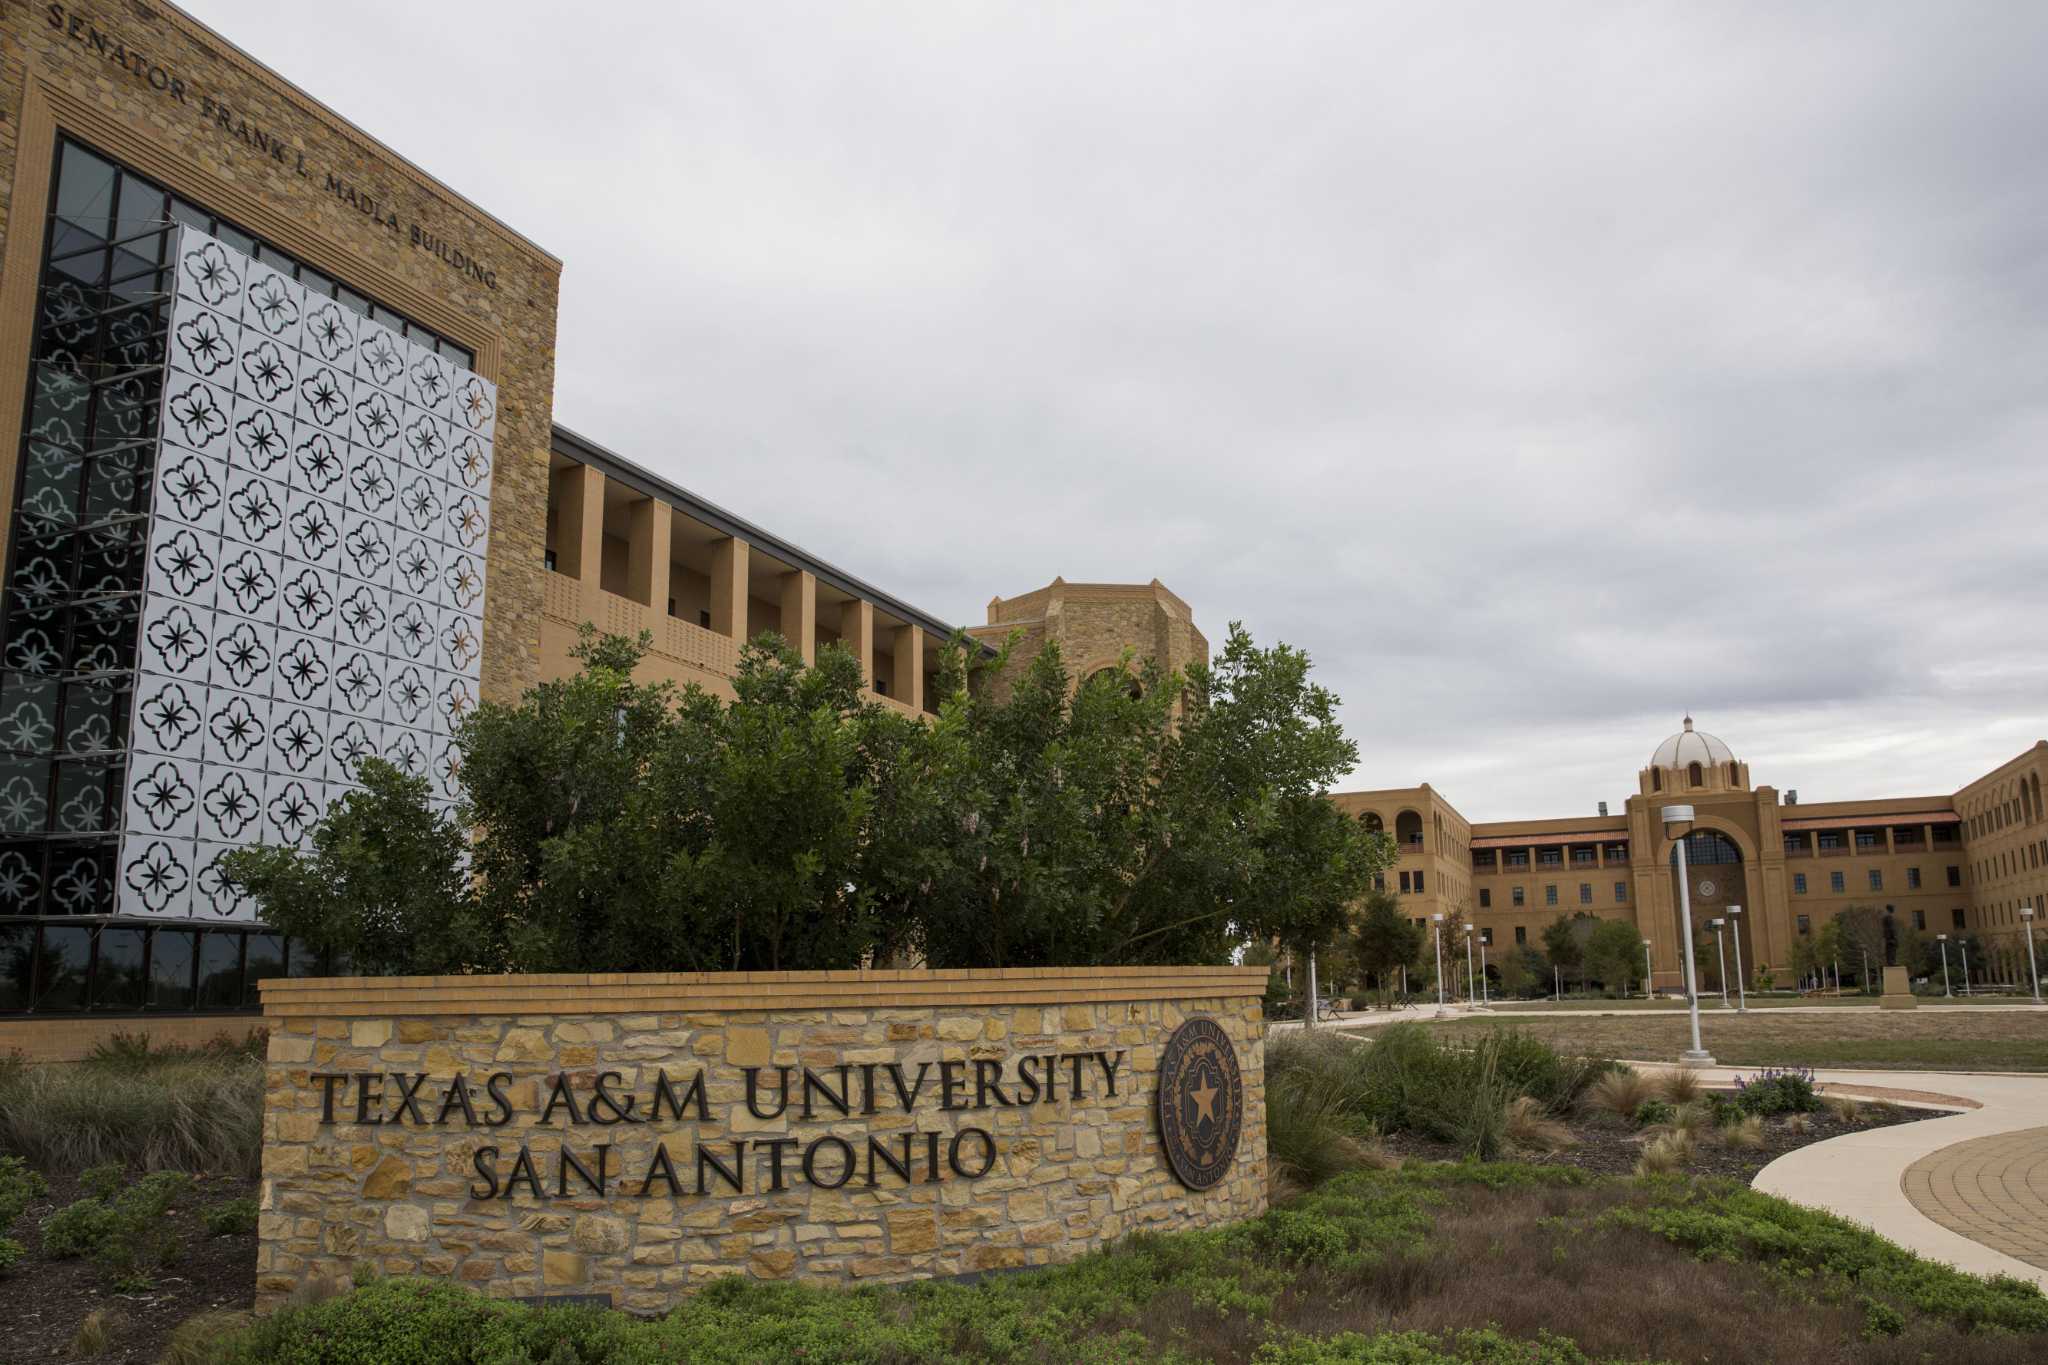 Texas A&M, University of Texas among 'cultiest colleges' in U.S.